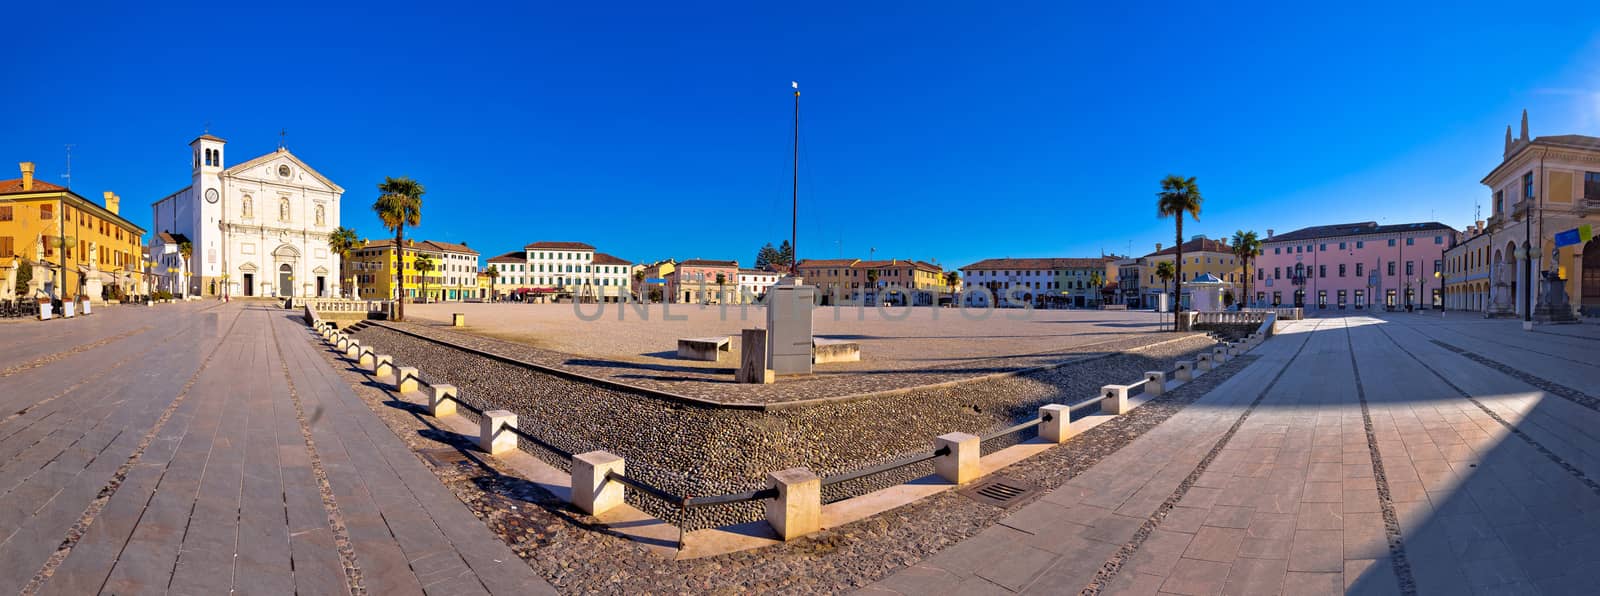 Central square in town of Palmanova panoramic view by xbrchx